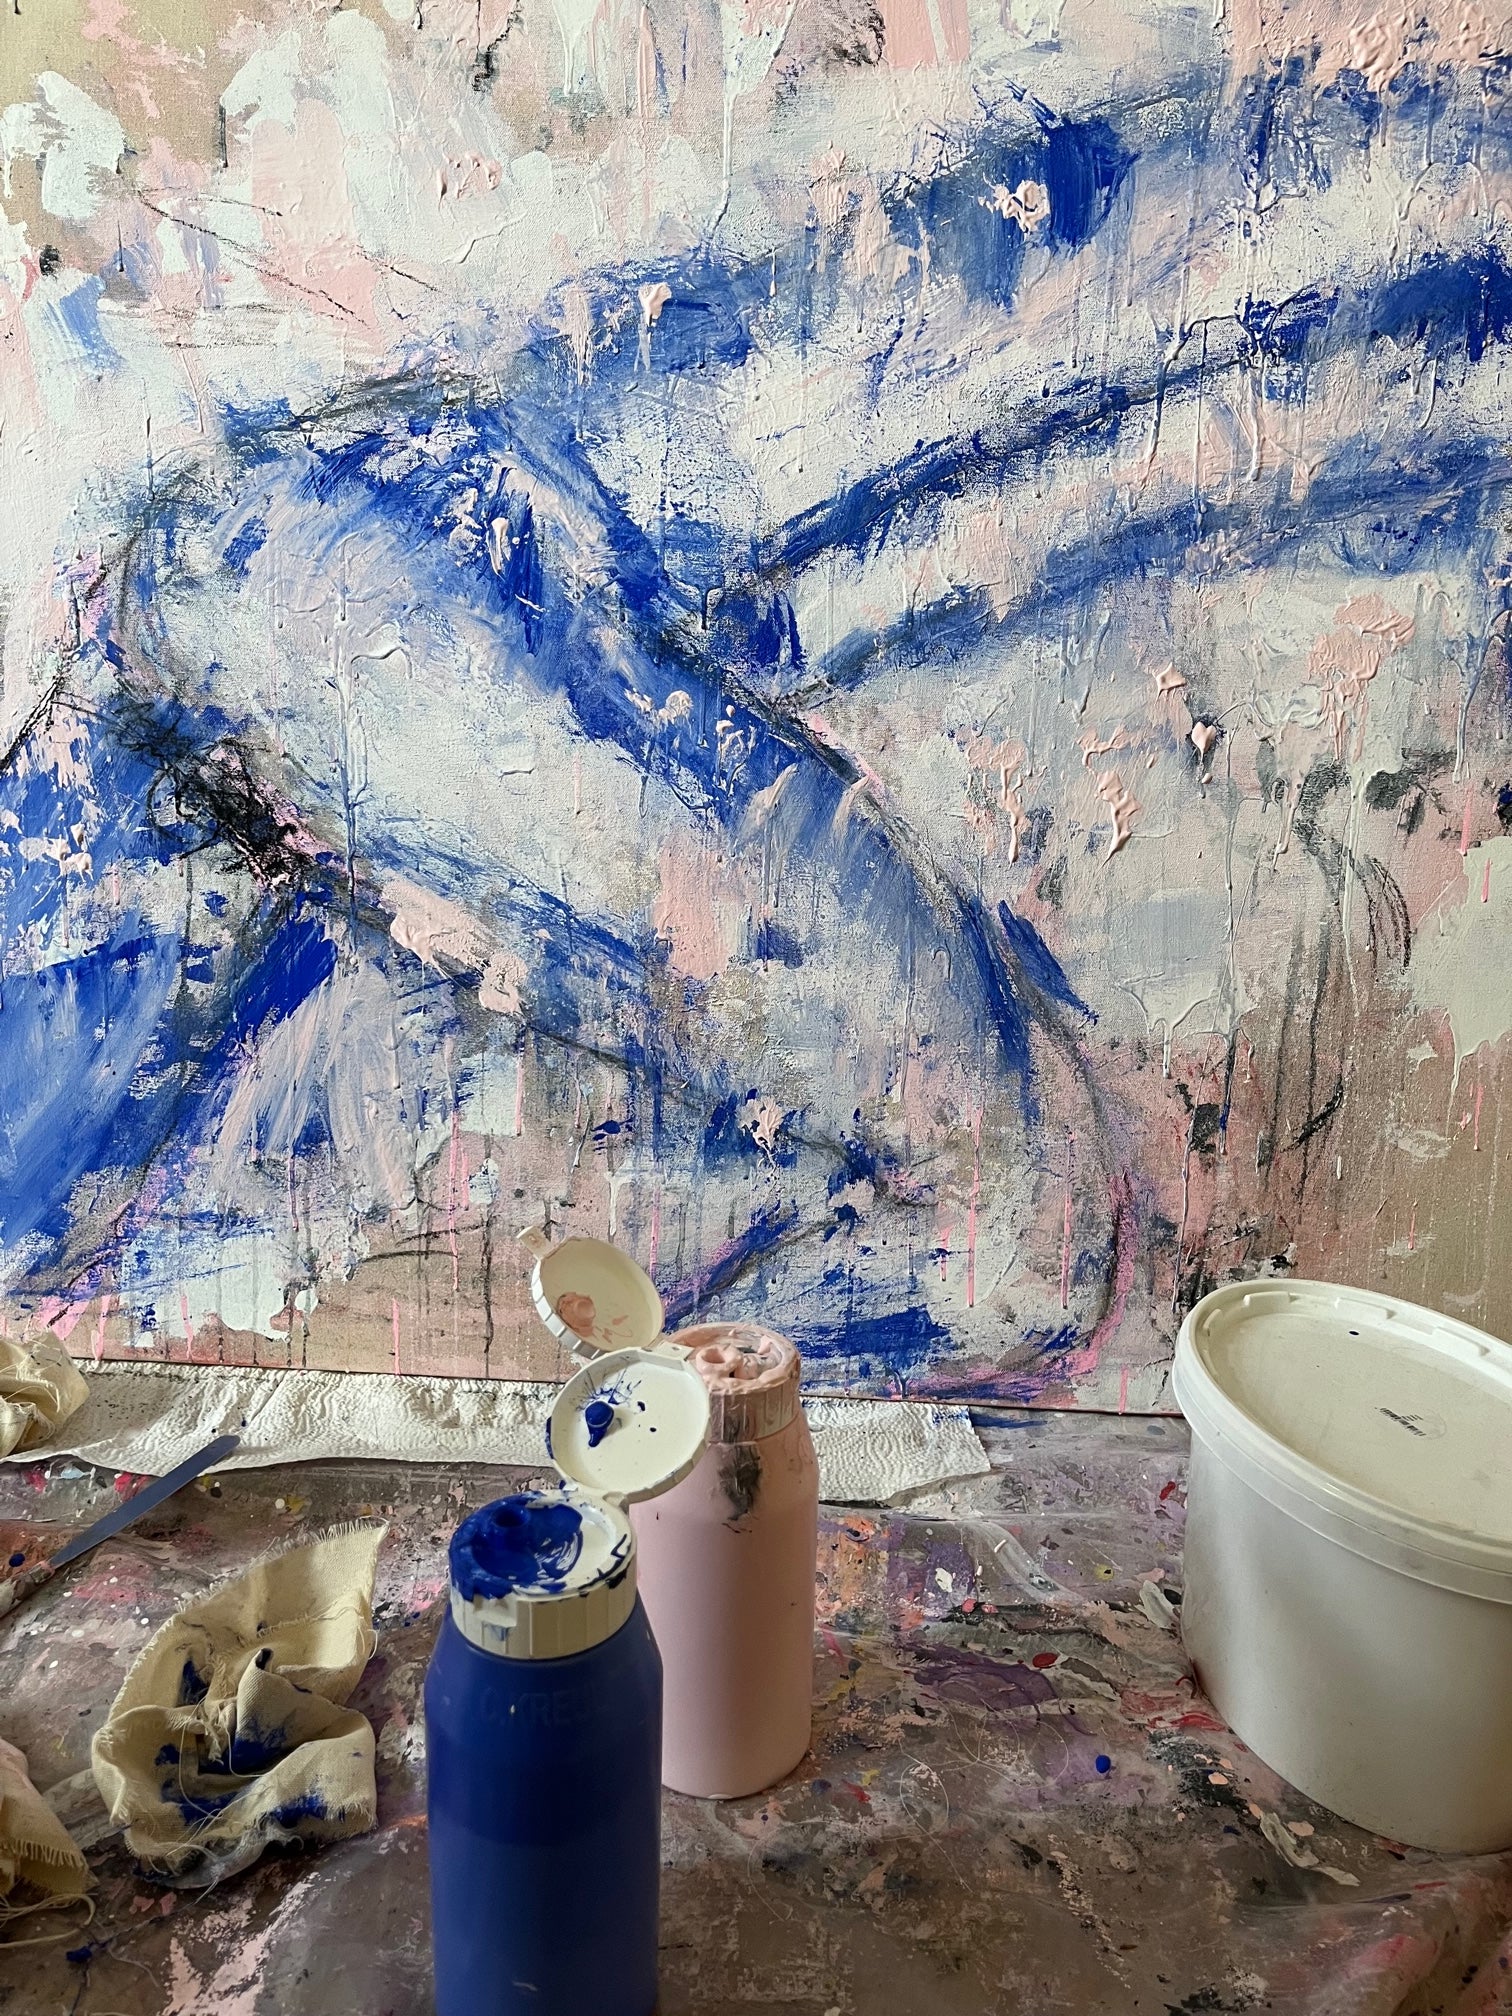 "Abstraction, Figuration and Emotion" Painting Workshop with visual artist Katja in Munich, Germany